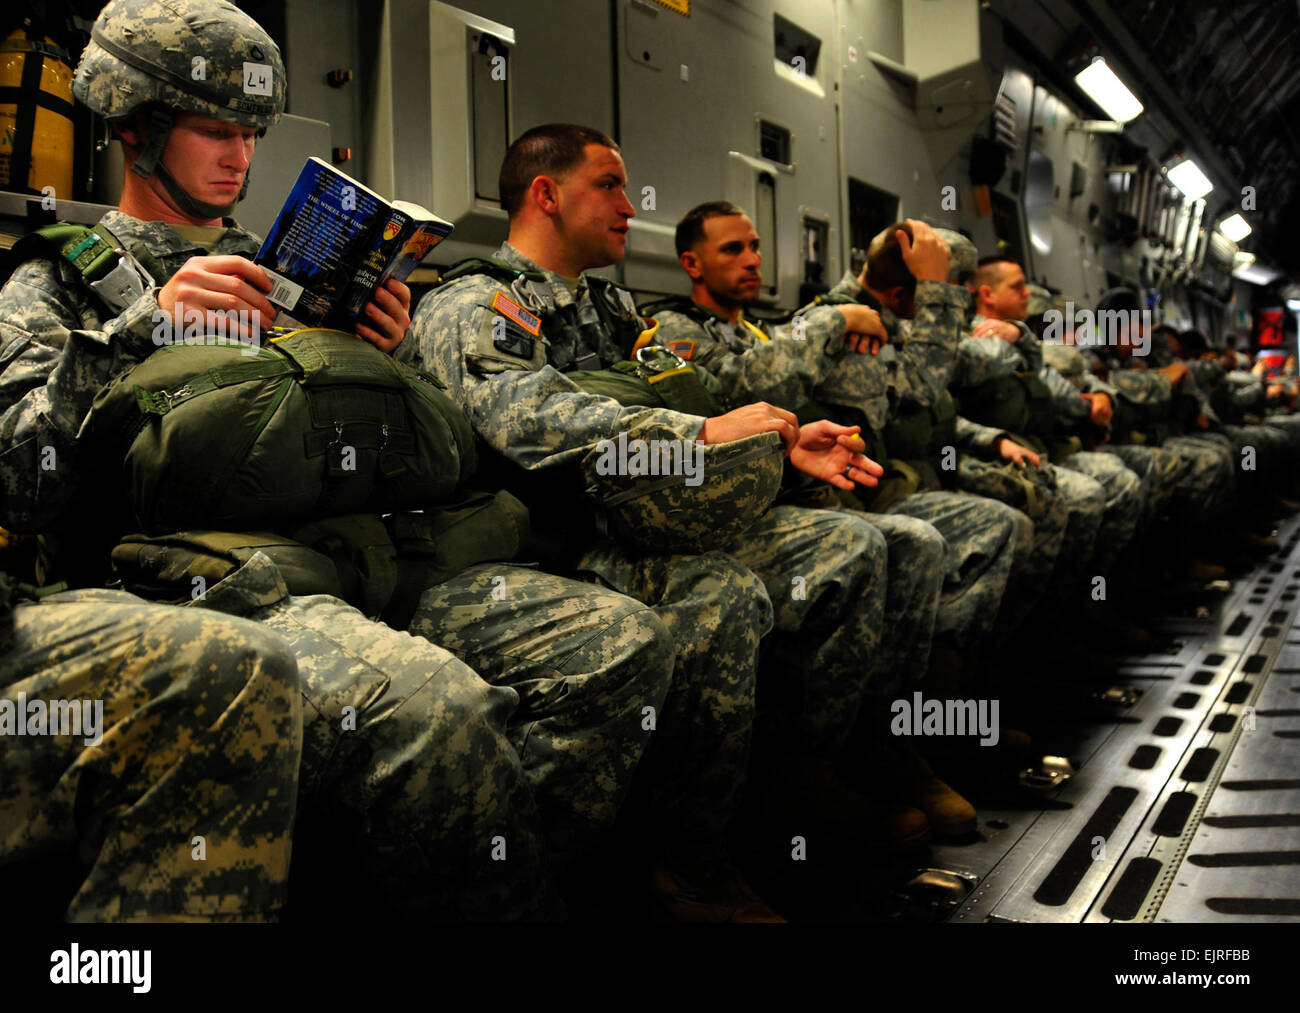 U.S. Army Pfc. Kyle Somerlot, with the 330th Transportation Brigade, reads a book aboard a C-17 Globemaster III cargo aircraft as he awaits his turn to perform an airborne insertion during a joint forcible entry exercise at Pope Air Force Base, N.C., on June 21, 2010.  A joint forcible entry exercise is a weeklong exercise conducted six times a year by soldiers from Fort Bragg and airmen at Pope that is designed to enhance cohesion between the Army and Air Force through large-scale heavy equipment and troop movements.   Staff Sgt. Angelita M. Lawrence, U.S. Air Force. Stock Photo